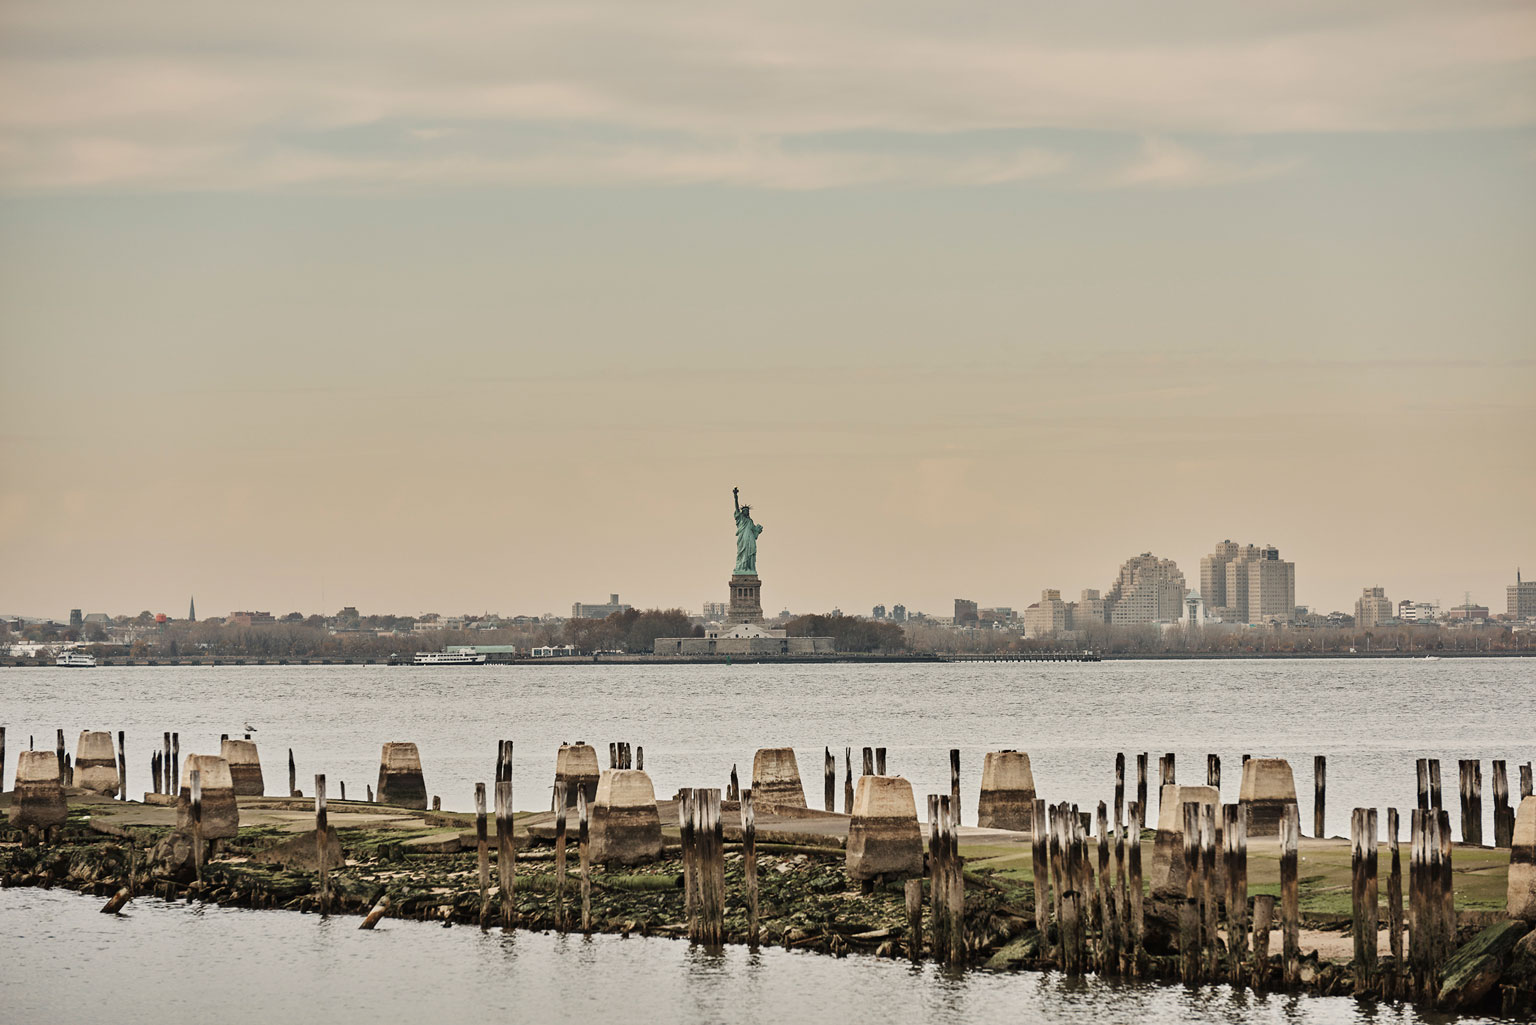 The Statue of Liberty from Sunset Park